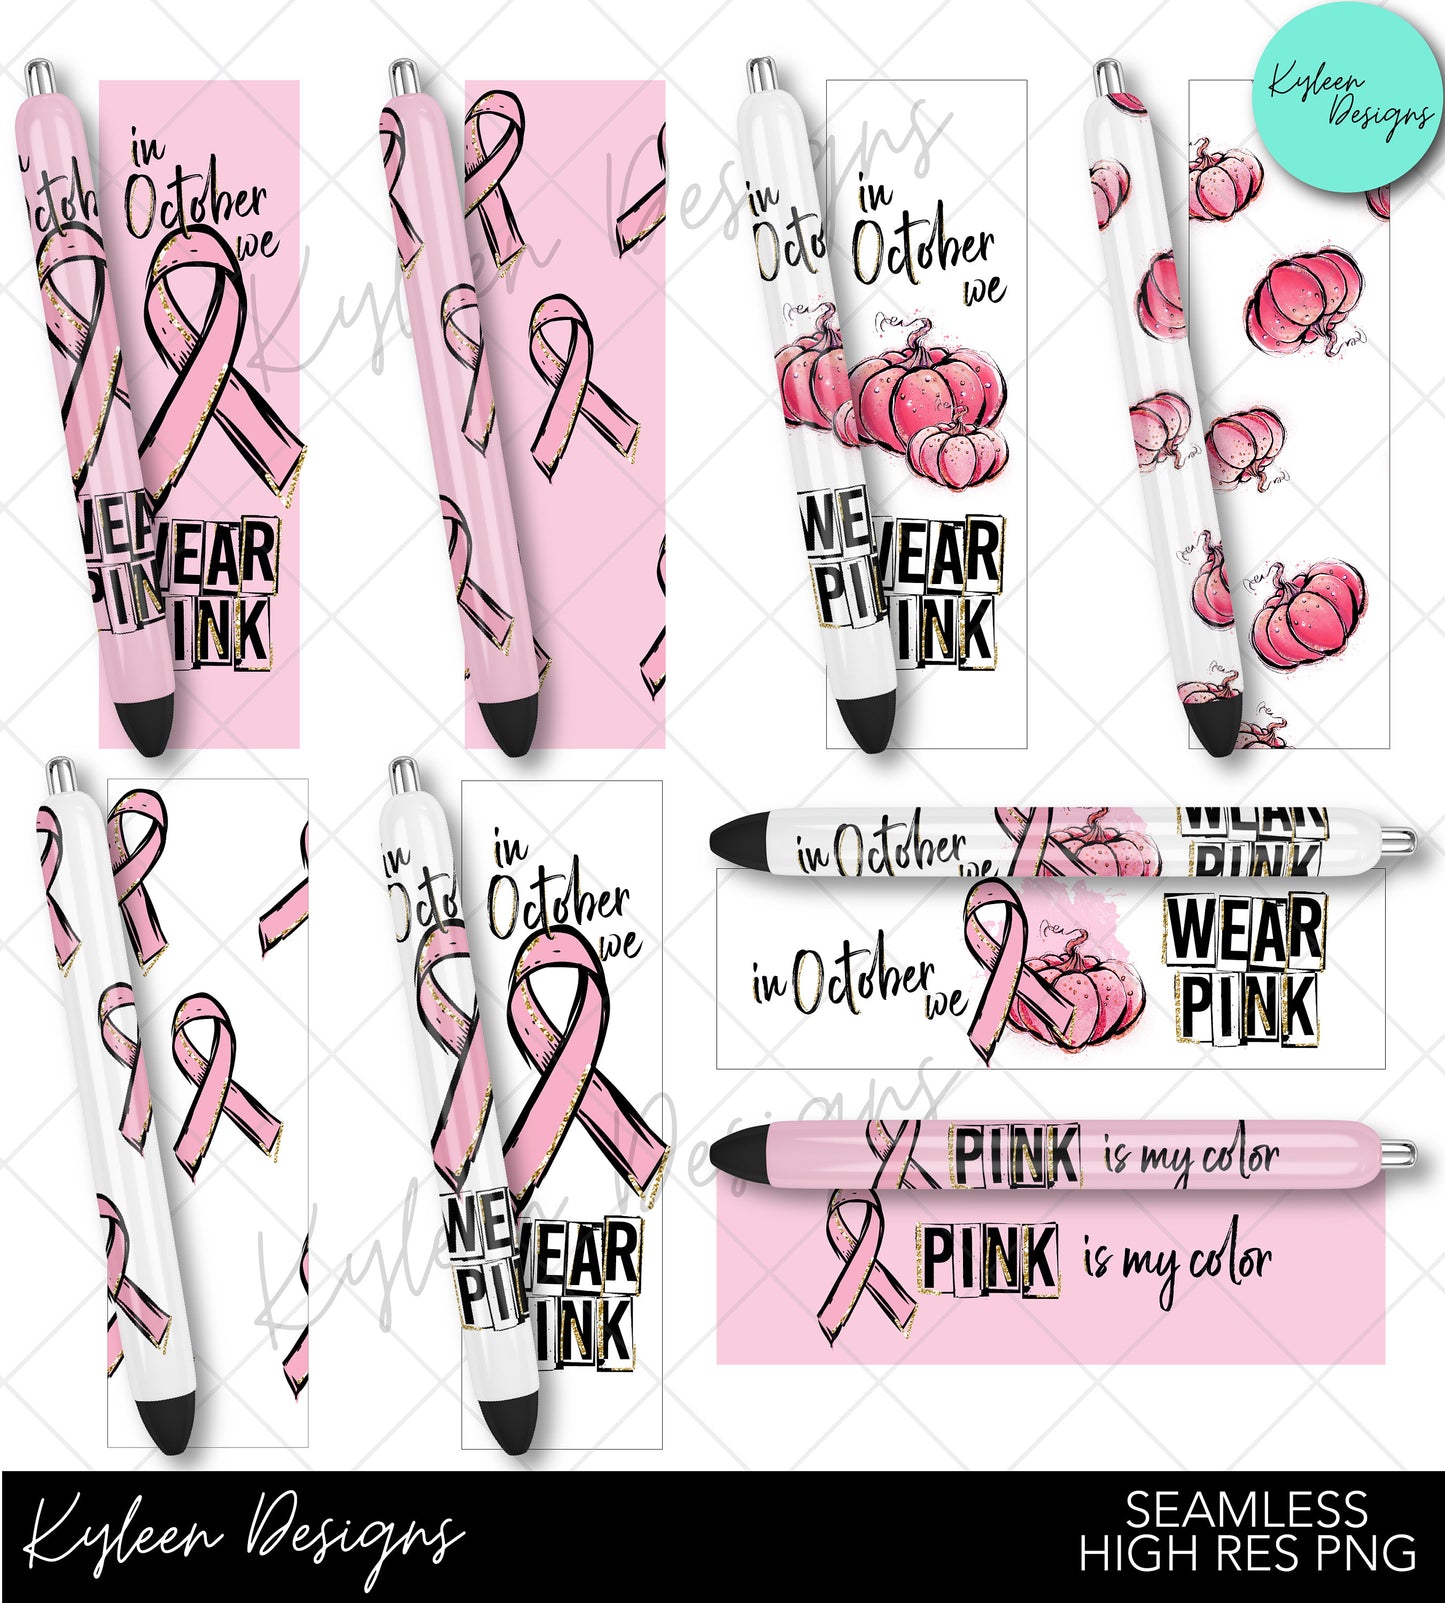 Breast Cancer We Wear Pink In October Pen Wraps For Waterslide, Sublimation or Vinyl High RES PNG SEAMLESS